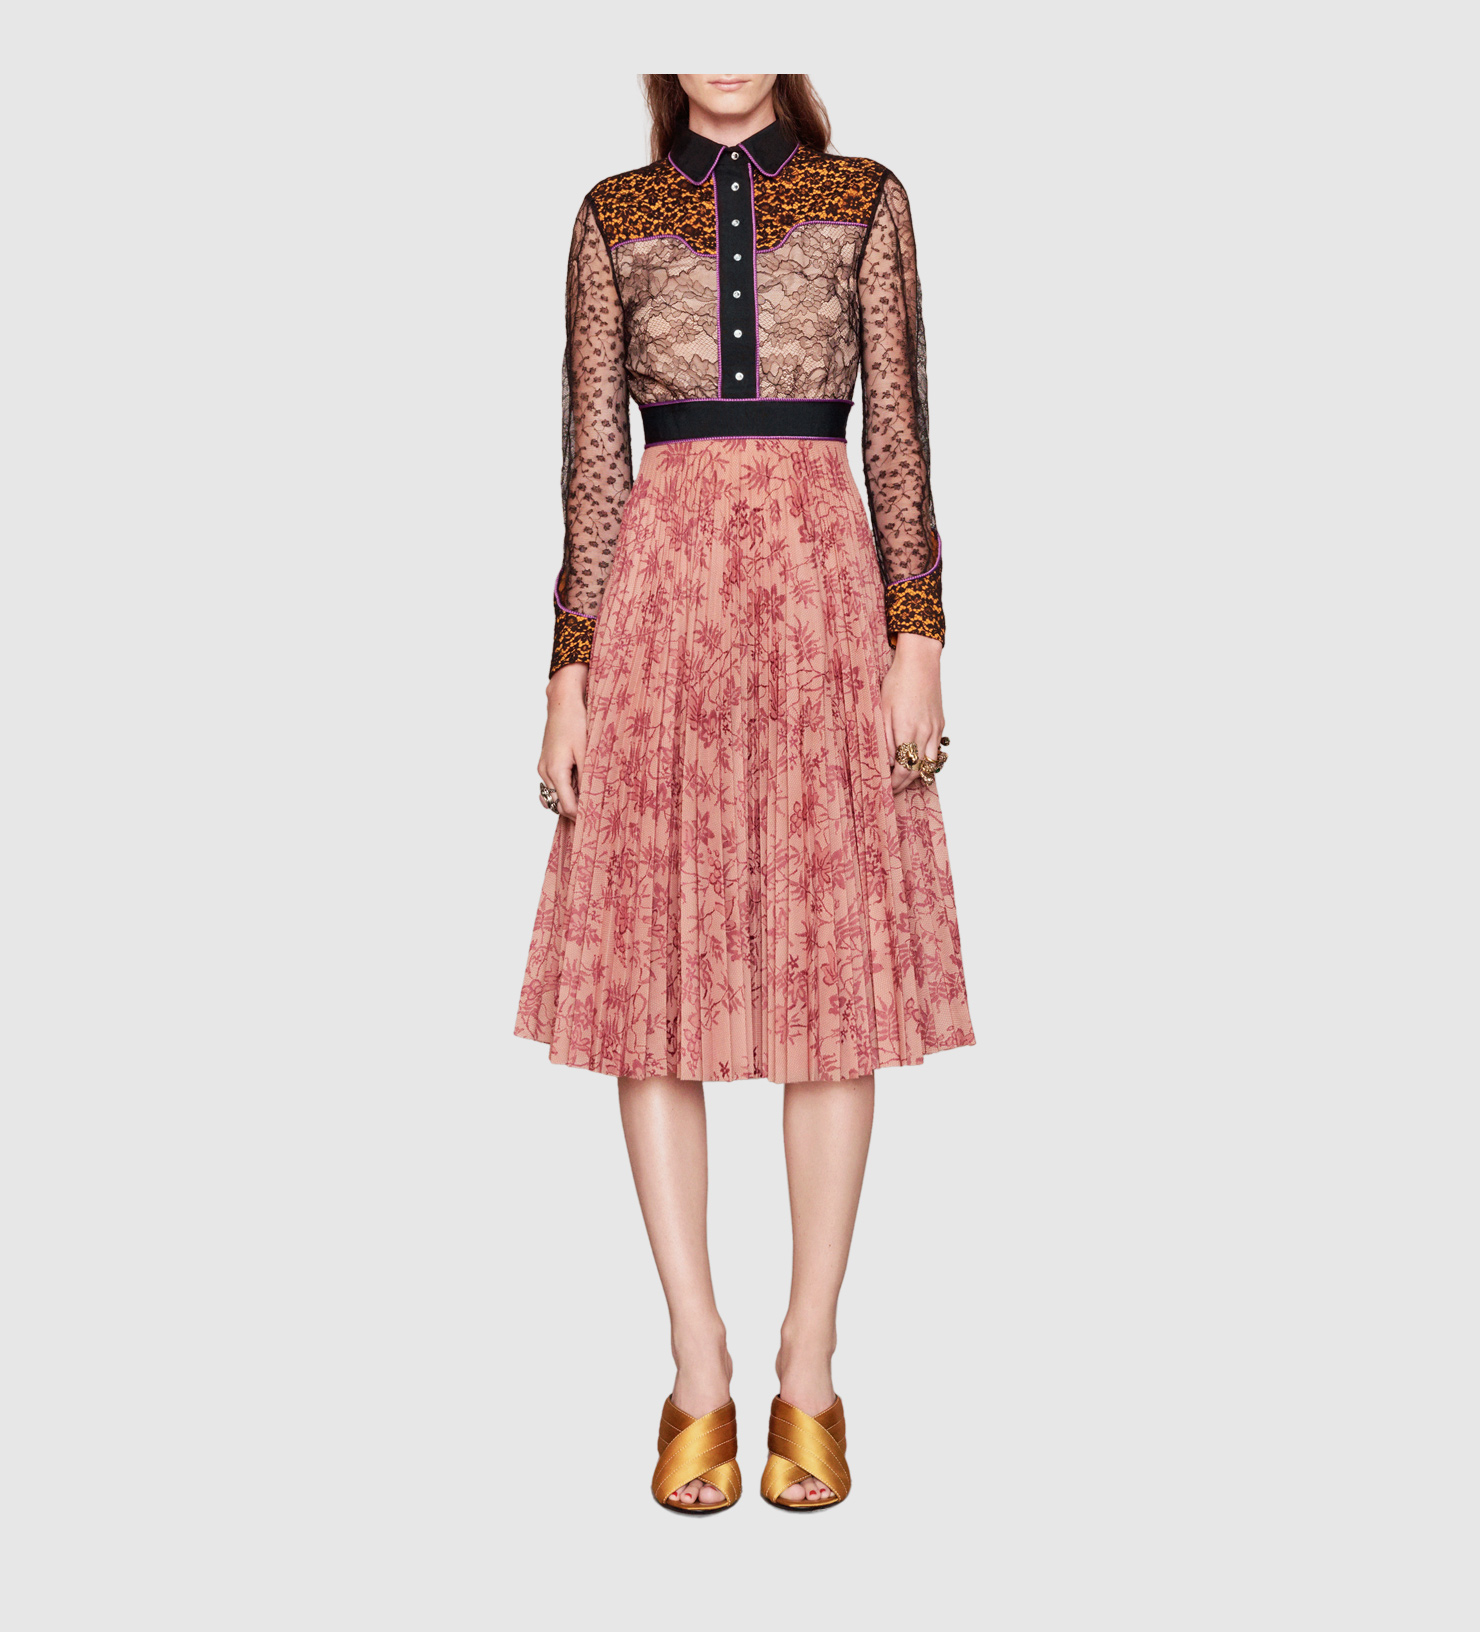 Lyst - Gucci Georgette Bonded Lace Dress in Pink